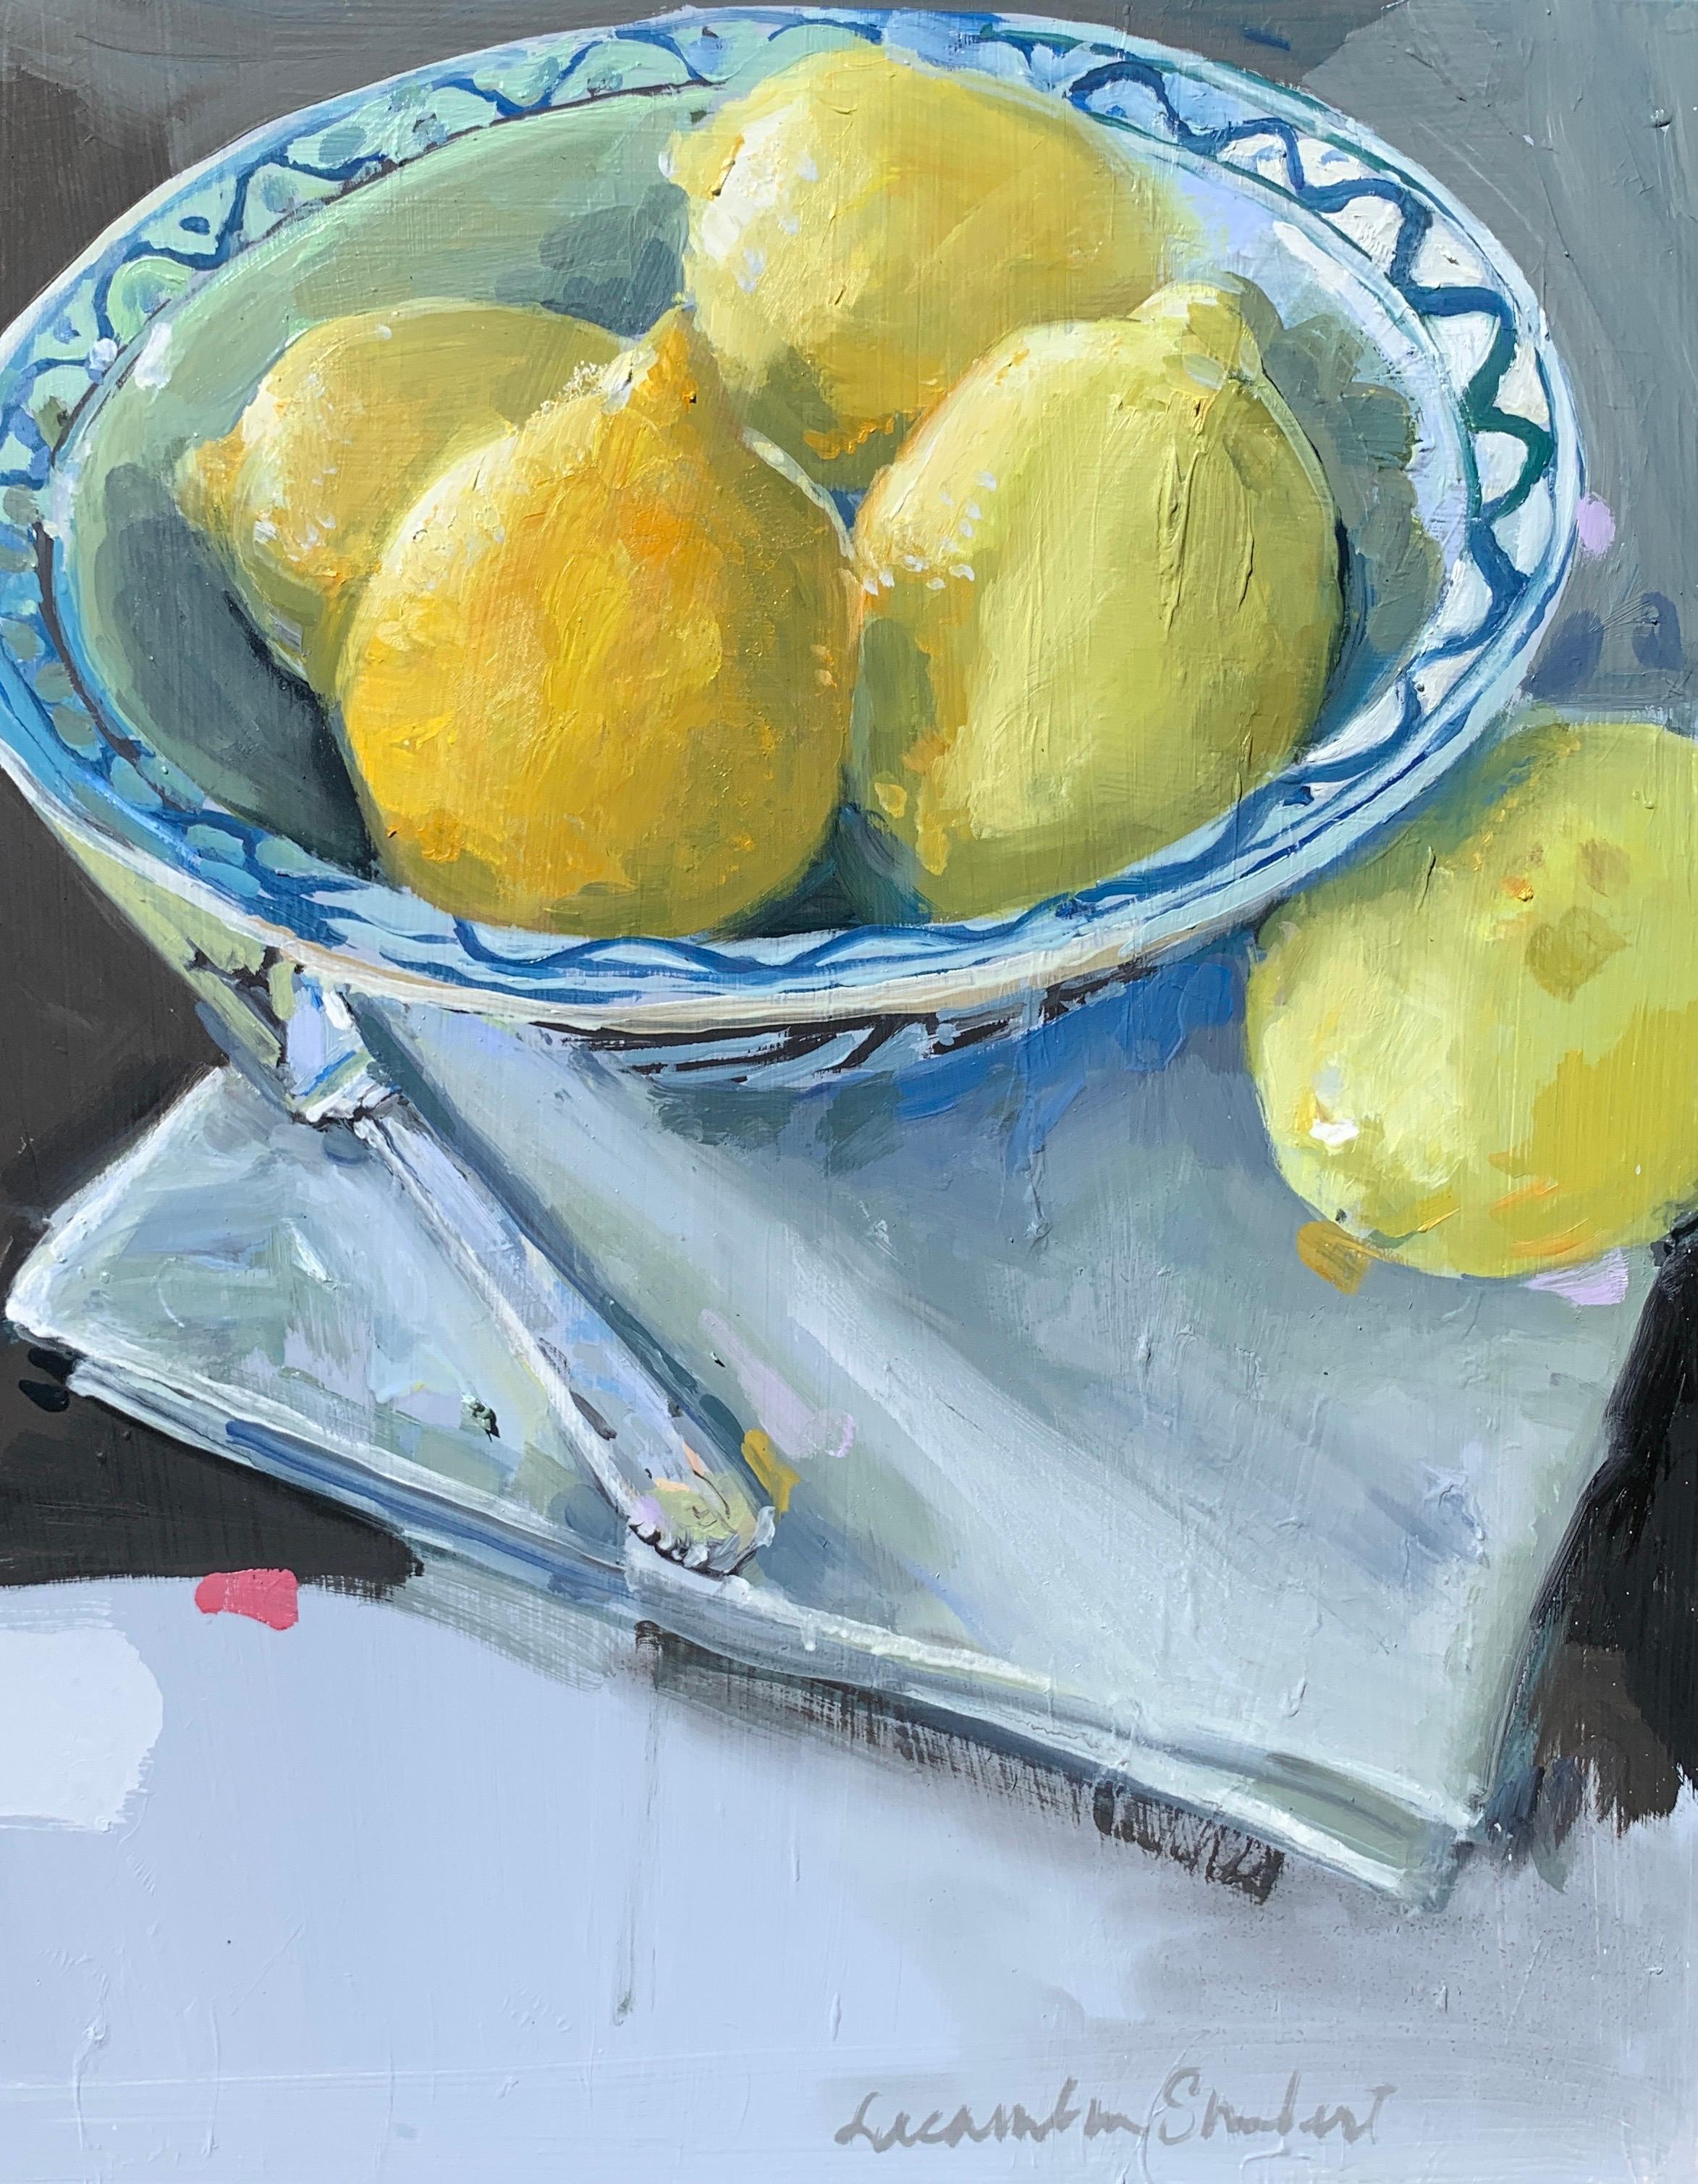 Laura Lacambra Shubert Figurative Painting - Lemons in a Blue and White Bowl by Laura Shubert, Petite Oil on Board Still Life